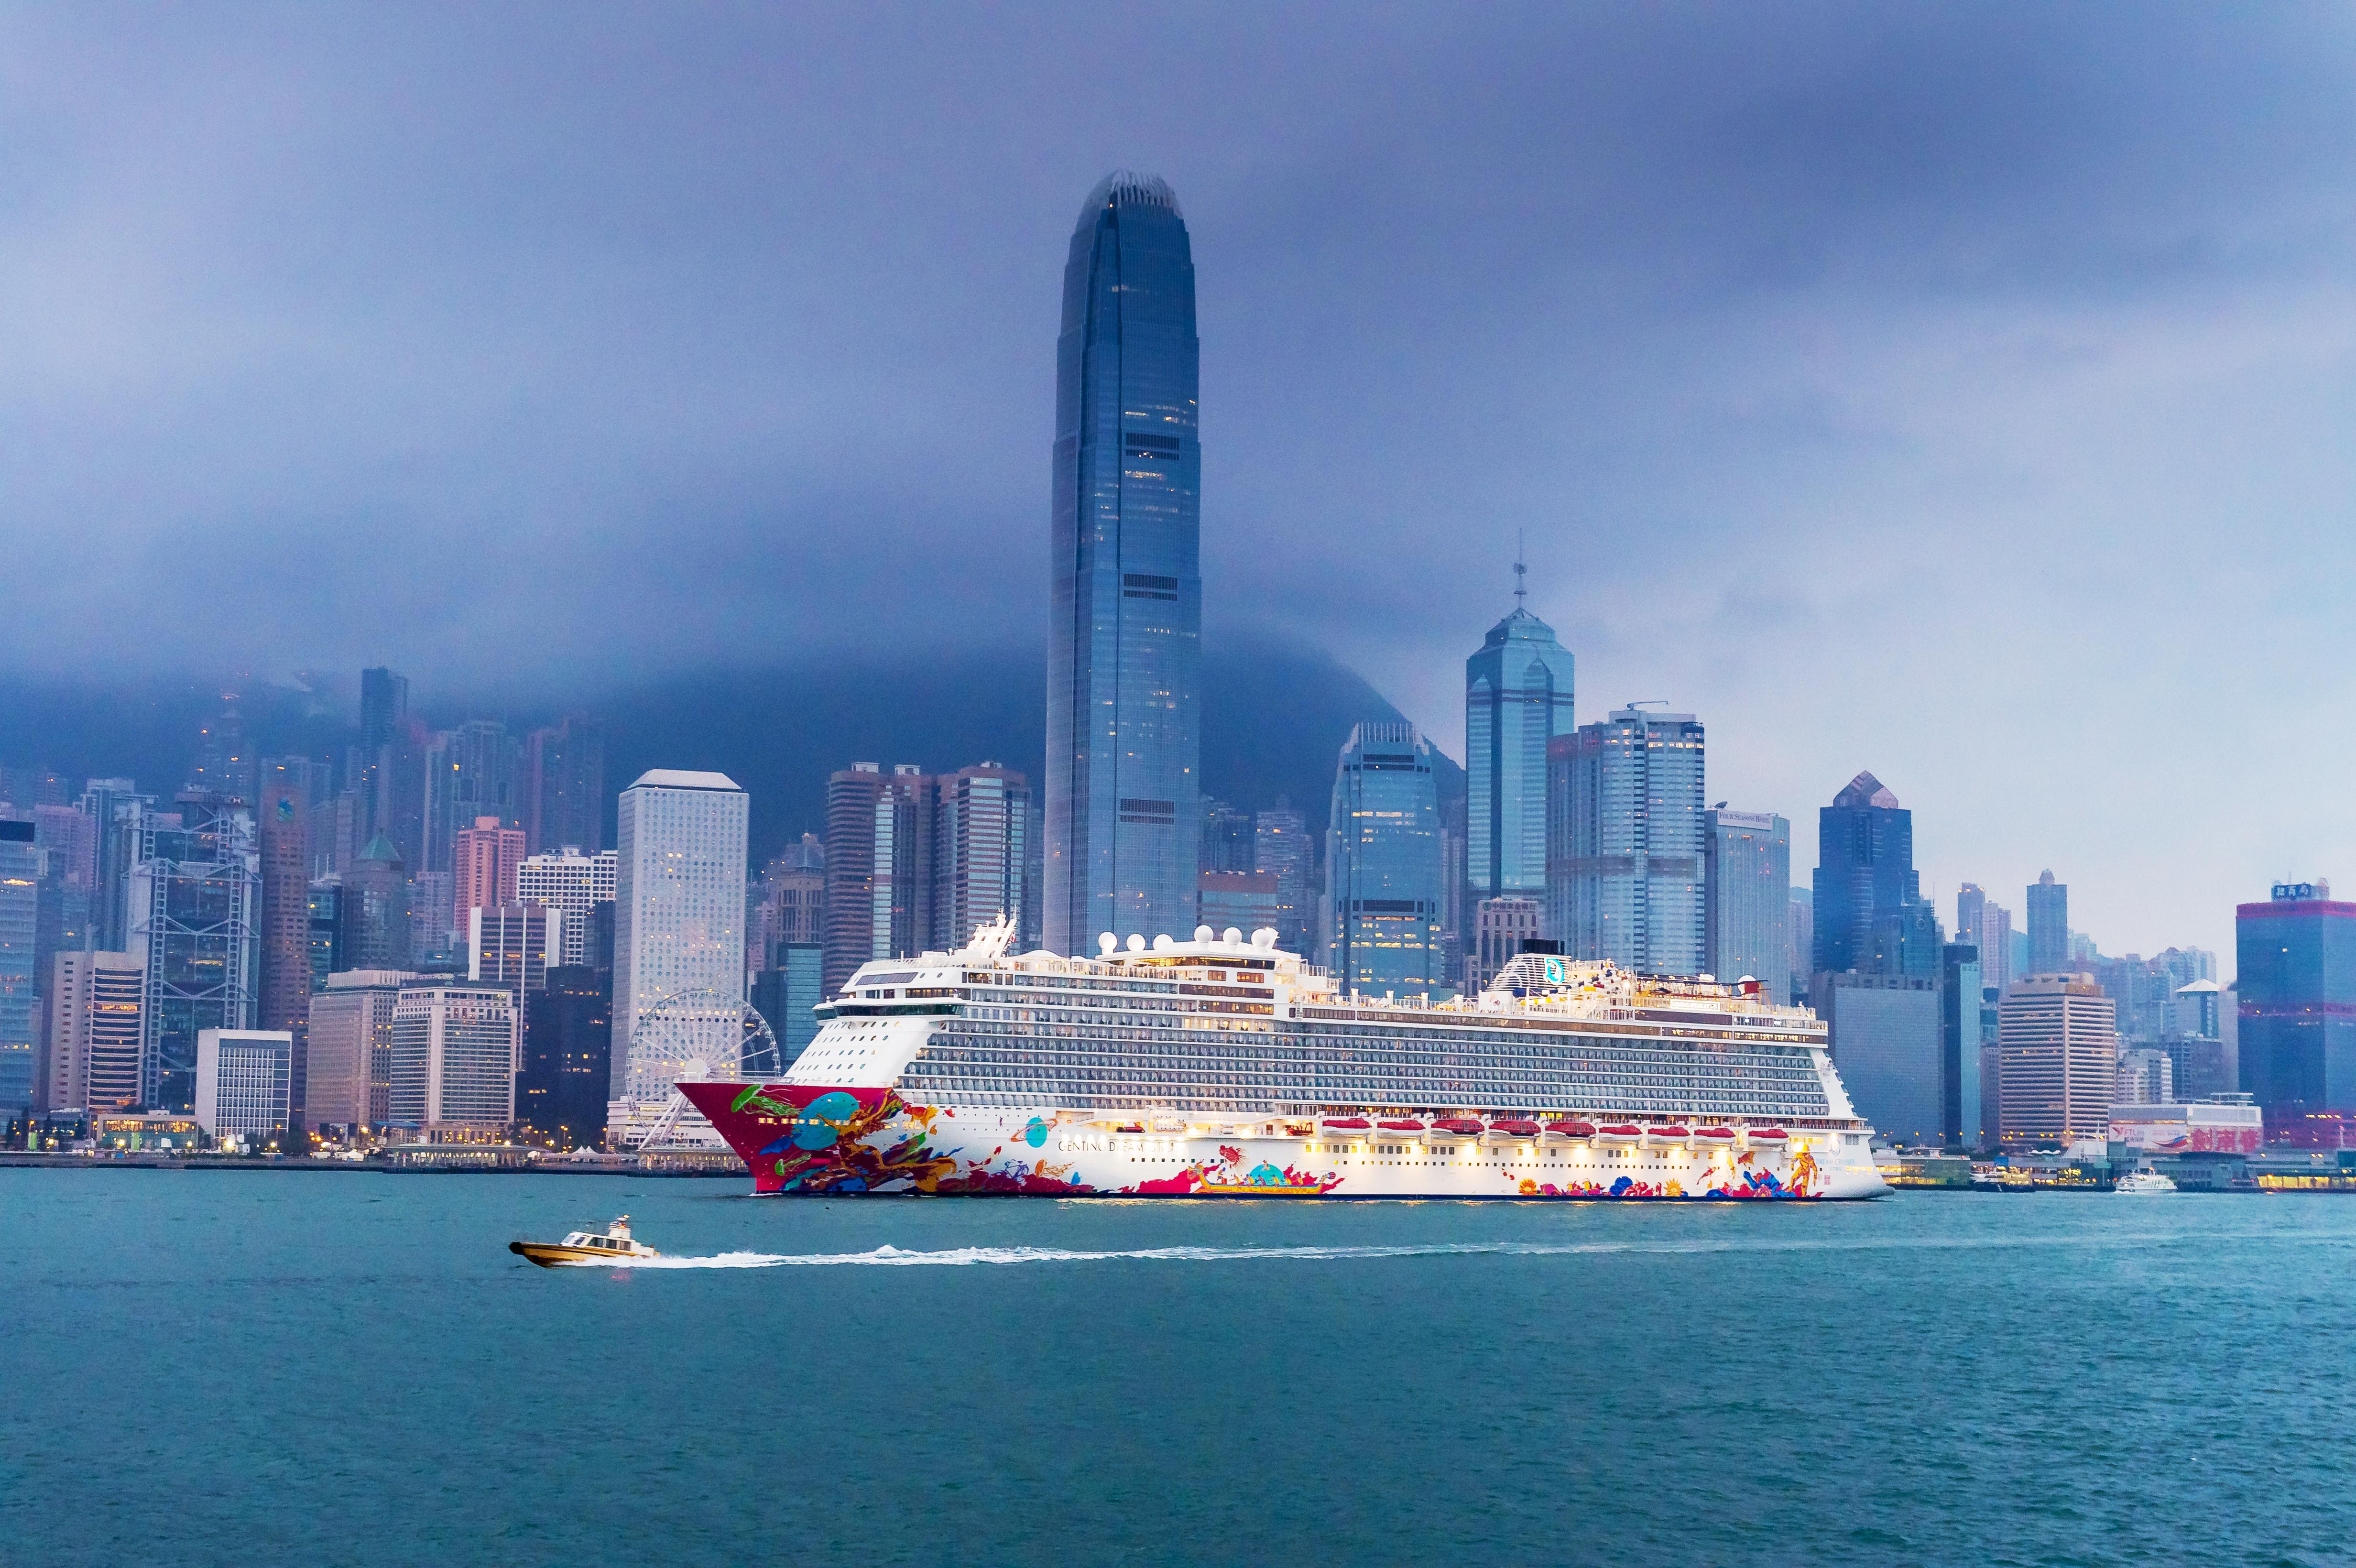 Dream Cruises Announces Resumption of Cruises in Hong Kong with Genting